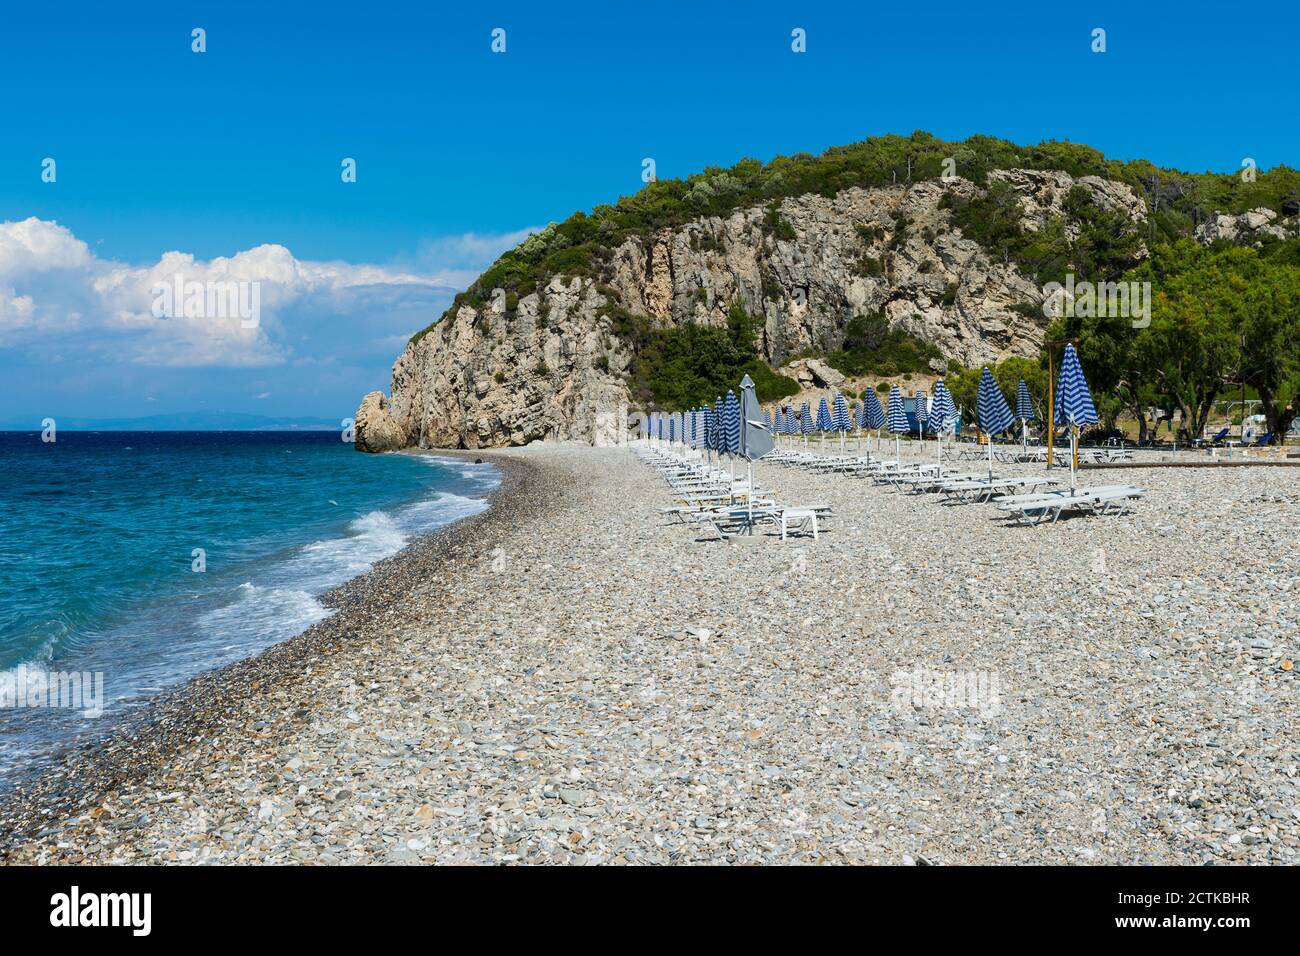 Greece, North Aegean, Rows of beach umbrellas and empty deck chairs on Tsambou beach in summer Stock Photo